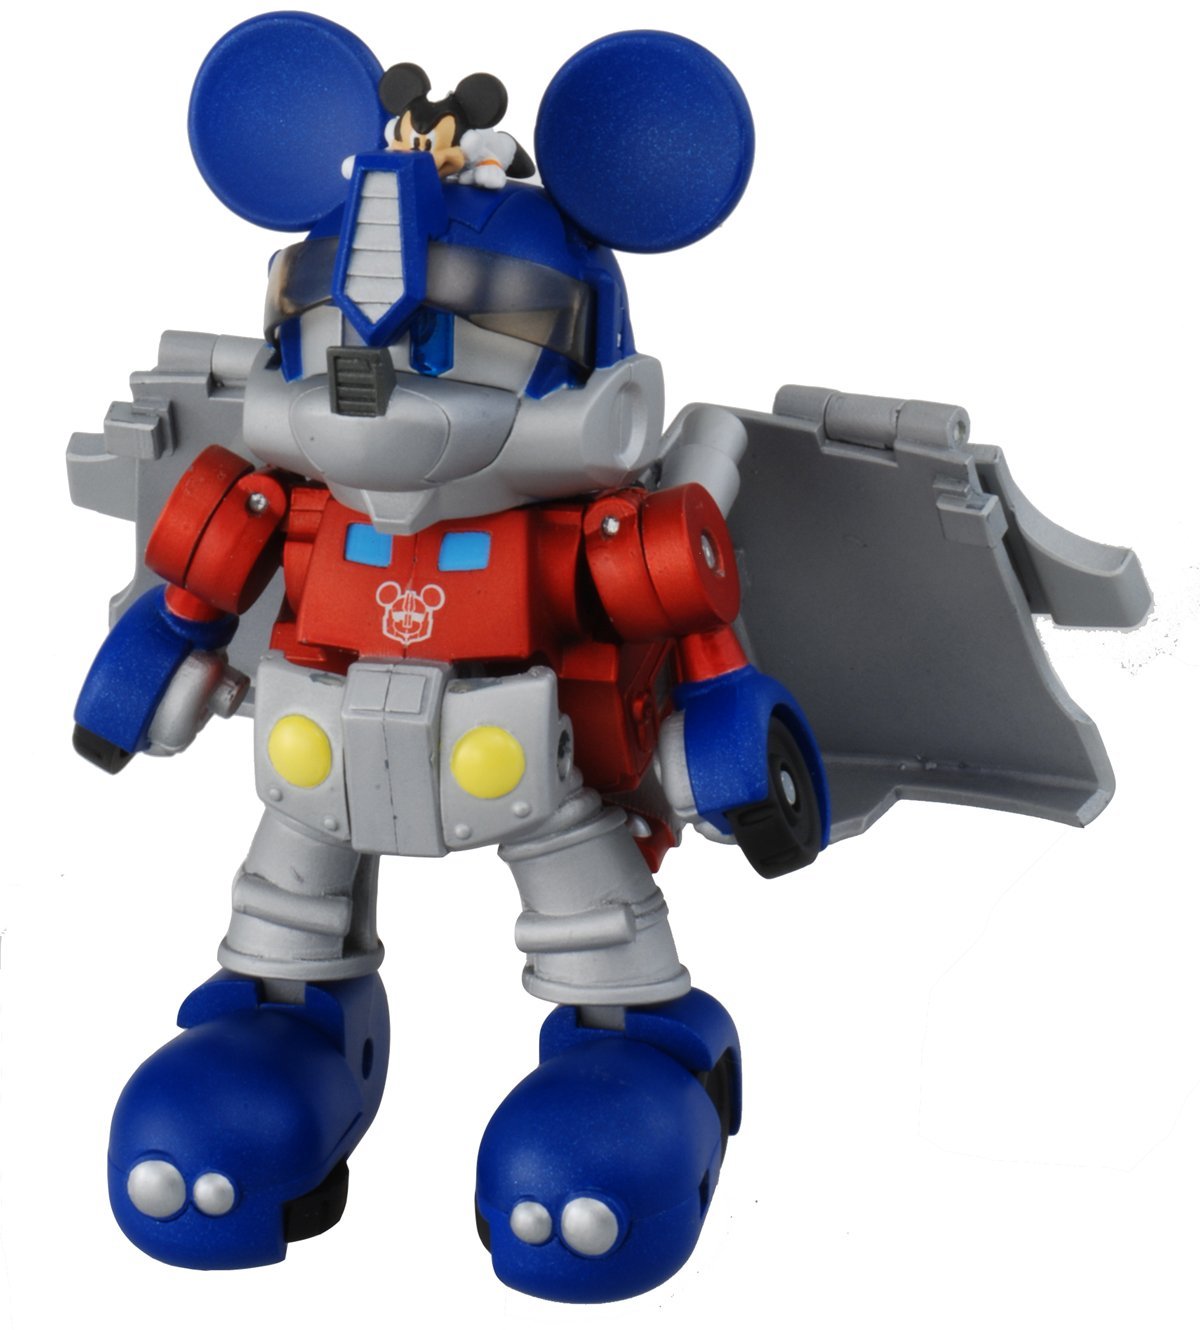 Transformers Disney Label Mickey Mouse Color Version